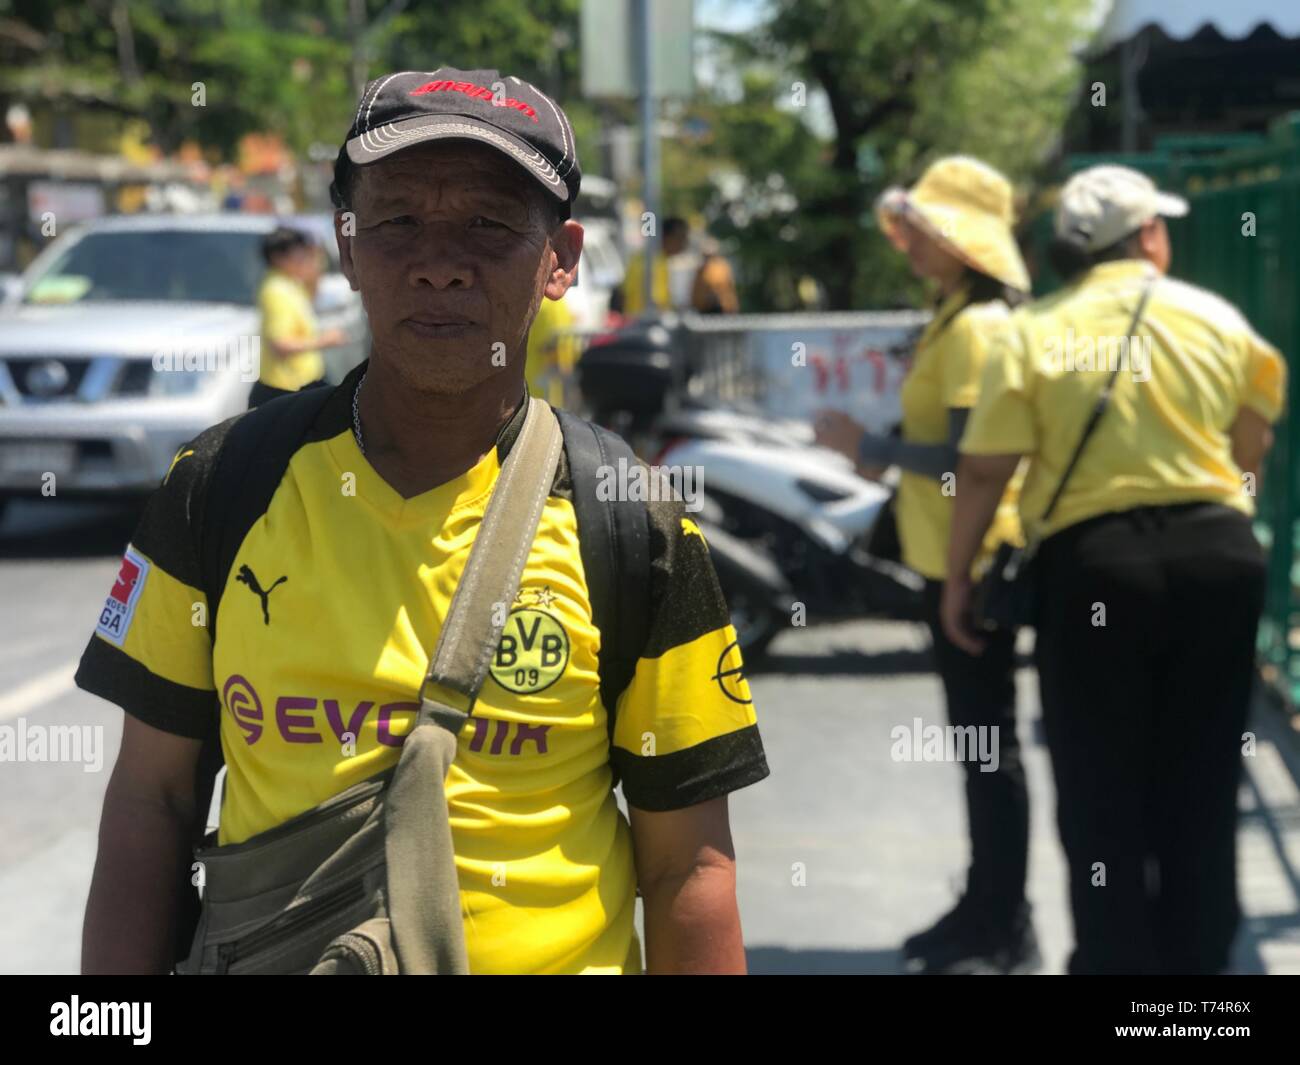 Bangkok, Thailand. 04th May, 2019. For the coronation of Thailand's King Maha Vajiralongkorn on Saturday in Bangkok, a supporter of the Bundesliga soccer team Borussia Dortmund has misappropriated his jersey. The military government had appealed to all Thais to wear yellow, the colors of the royal house. Maha Vajiralongkorn is the tenth king since the beginning of the Chakri Dynasty in 1782. He also bears the name Rama X. Credit: Christoph Sator/dpa/Alamy Live News Stock Photo